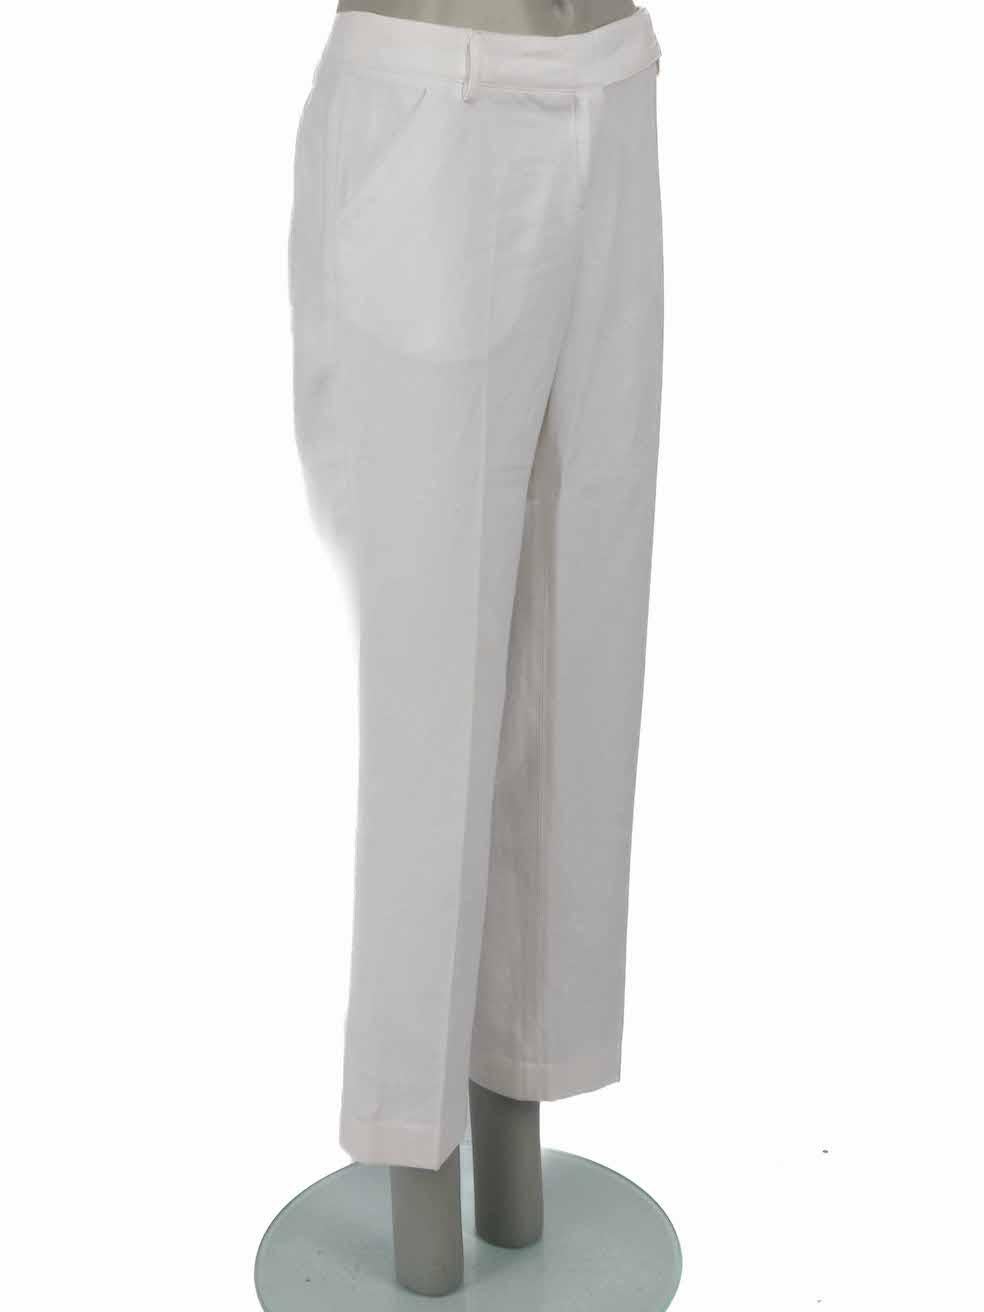 CONDITION is Good. Minor wear to trousers is evident. Light discoloured markings to overall fabric, slight pilling to inner legs and minor loose thread on belt loop on this used D&G designer resale item.
 
Details
White
Cotton
Trousers
Tapered
Mid